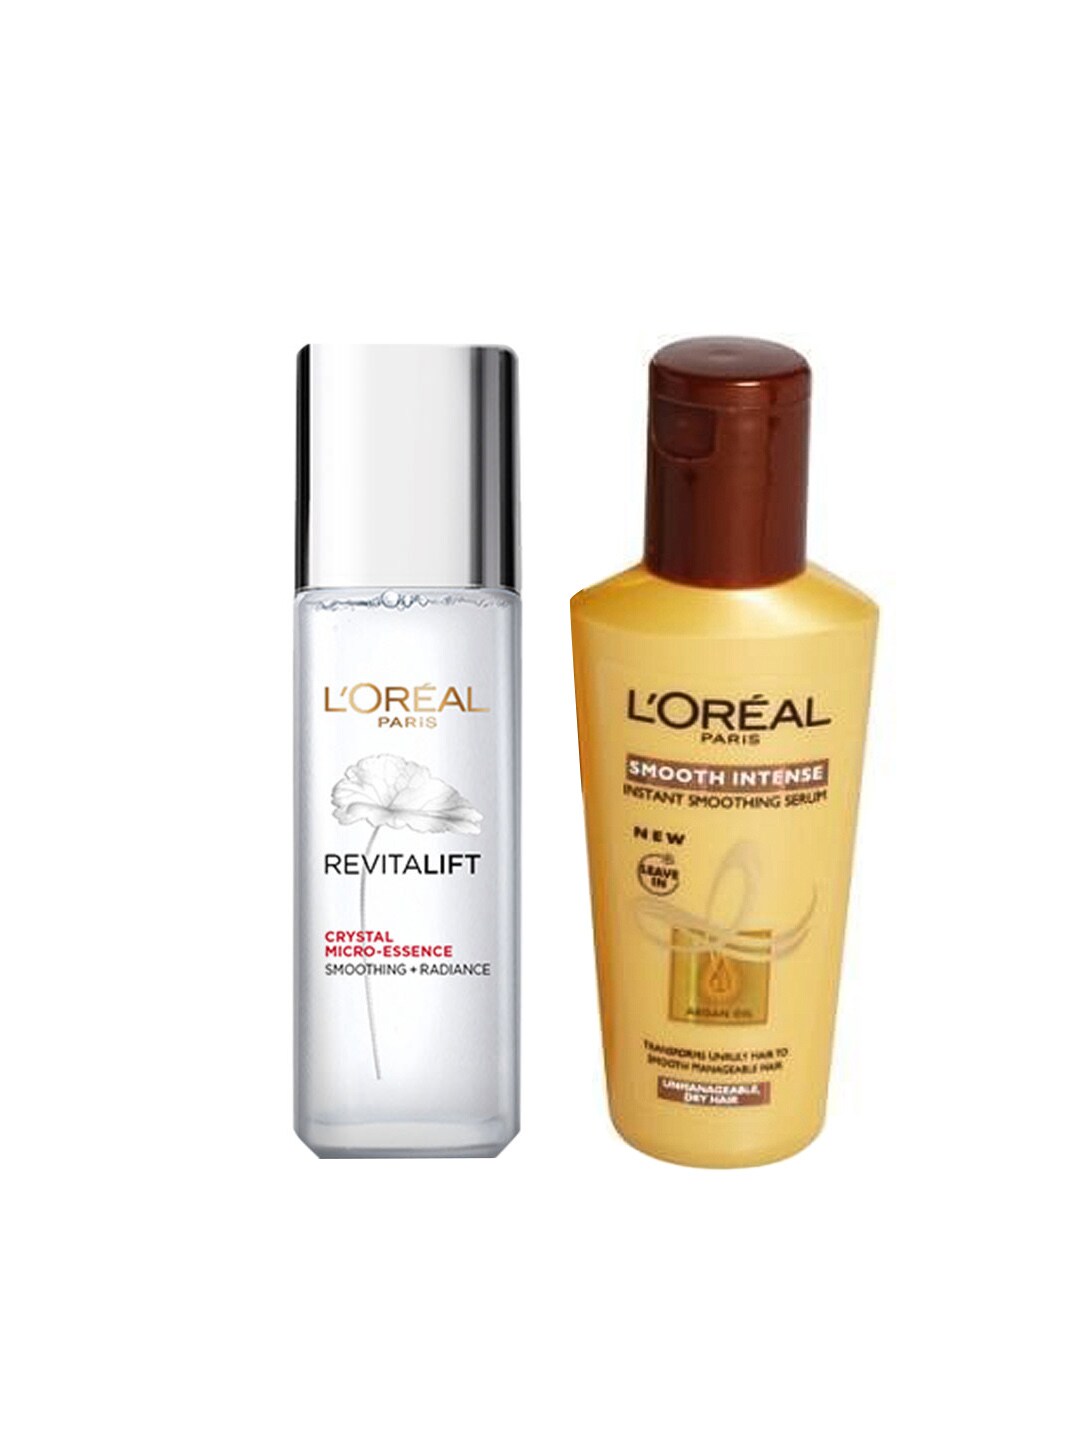 L'Oreal Set of Intense Instant Hair Serum & Revitalift Crystal Micro-Essence Face Serum Price in India